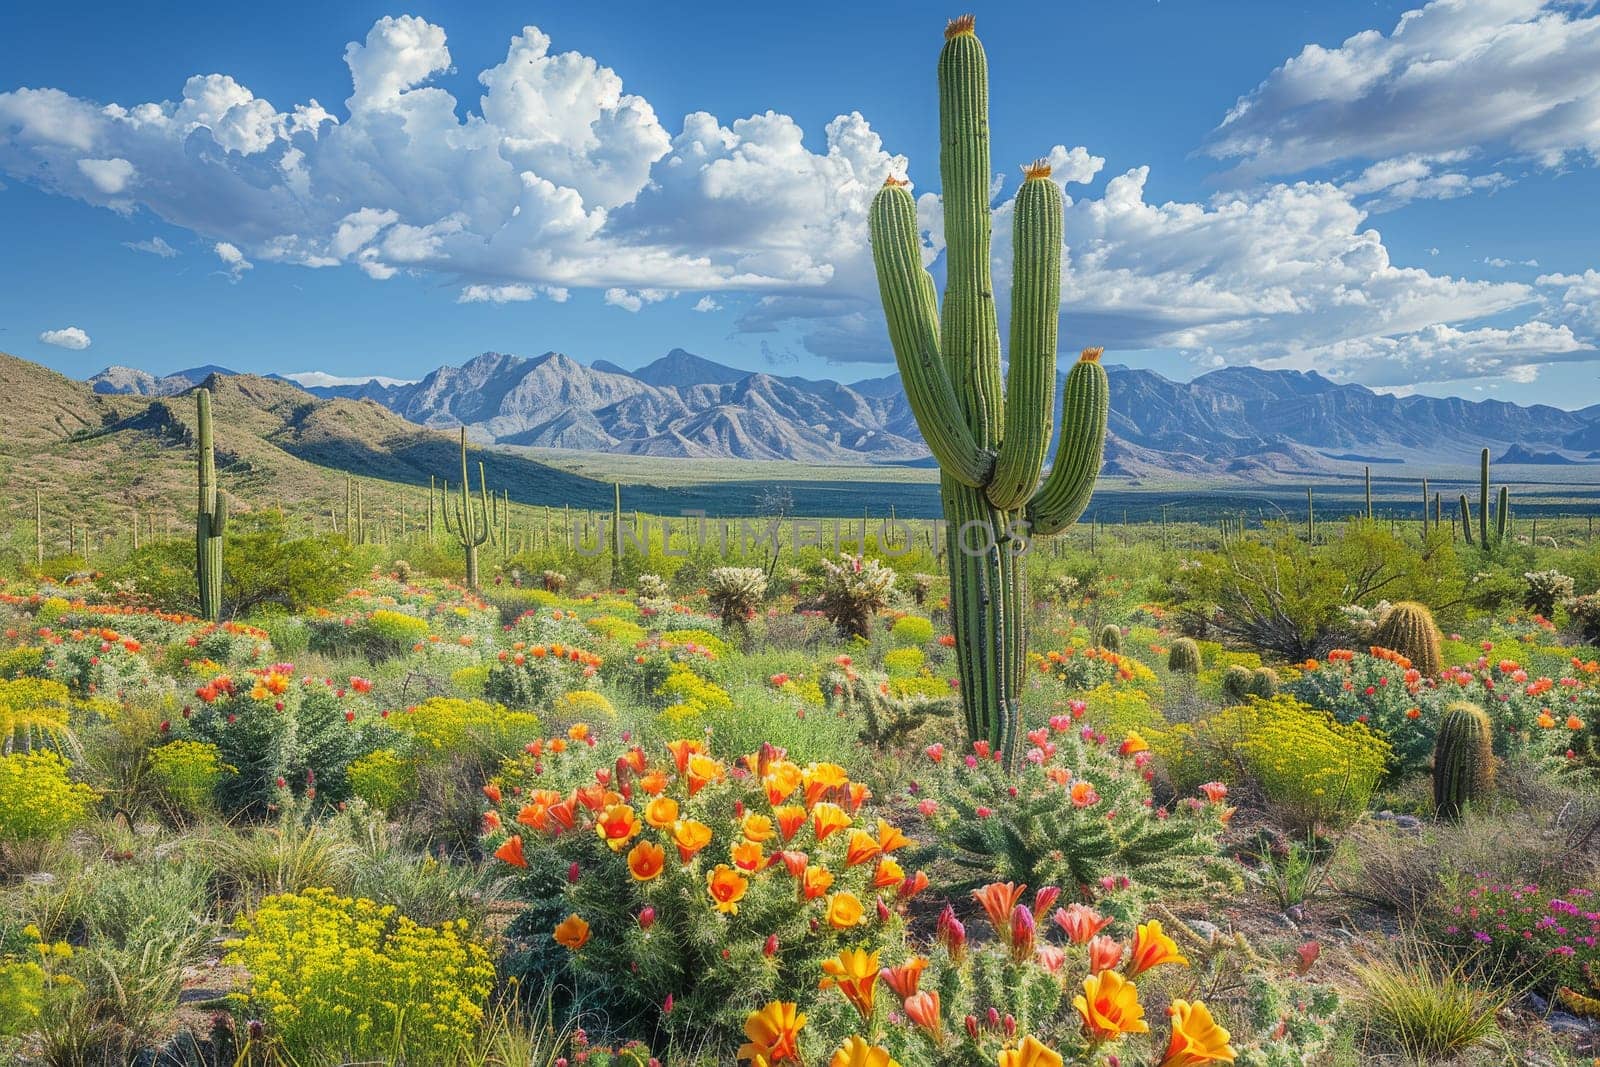 A desert landscape with a large cactus in the foreground. The cactus is surrounded by a field of flowers, including yellow flowers. The sky is clear and blue